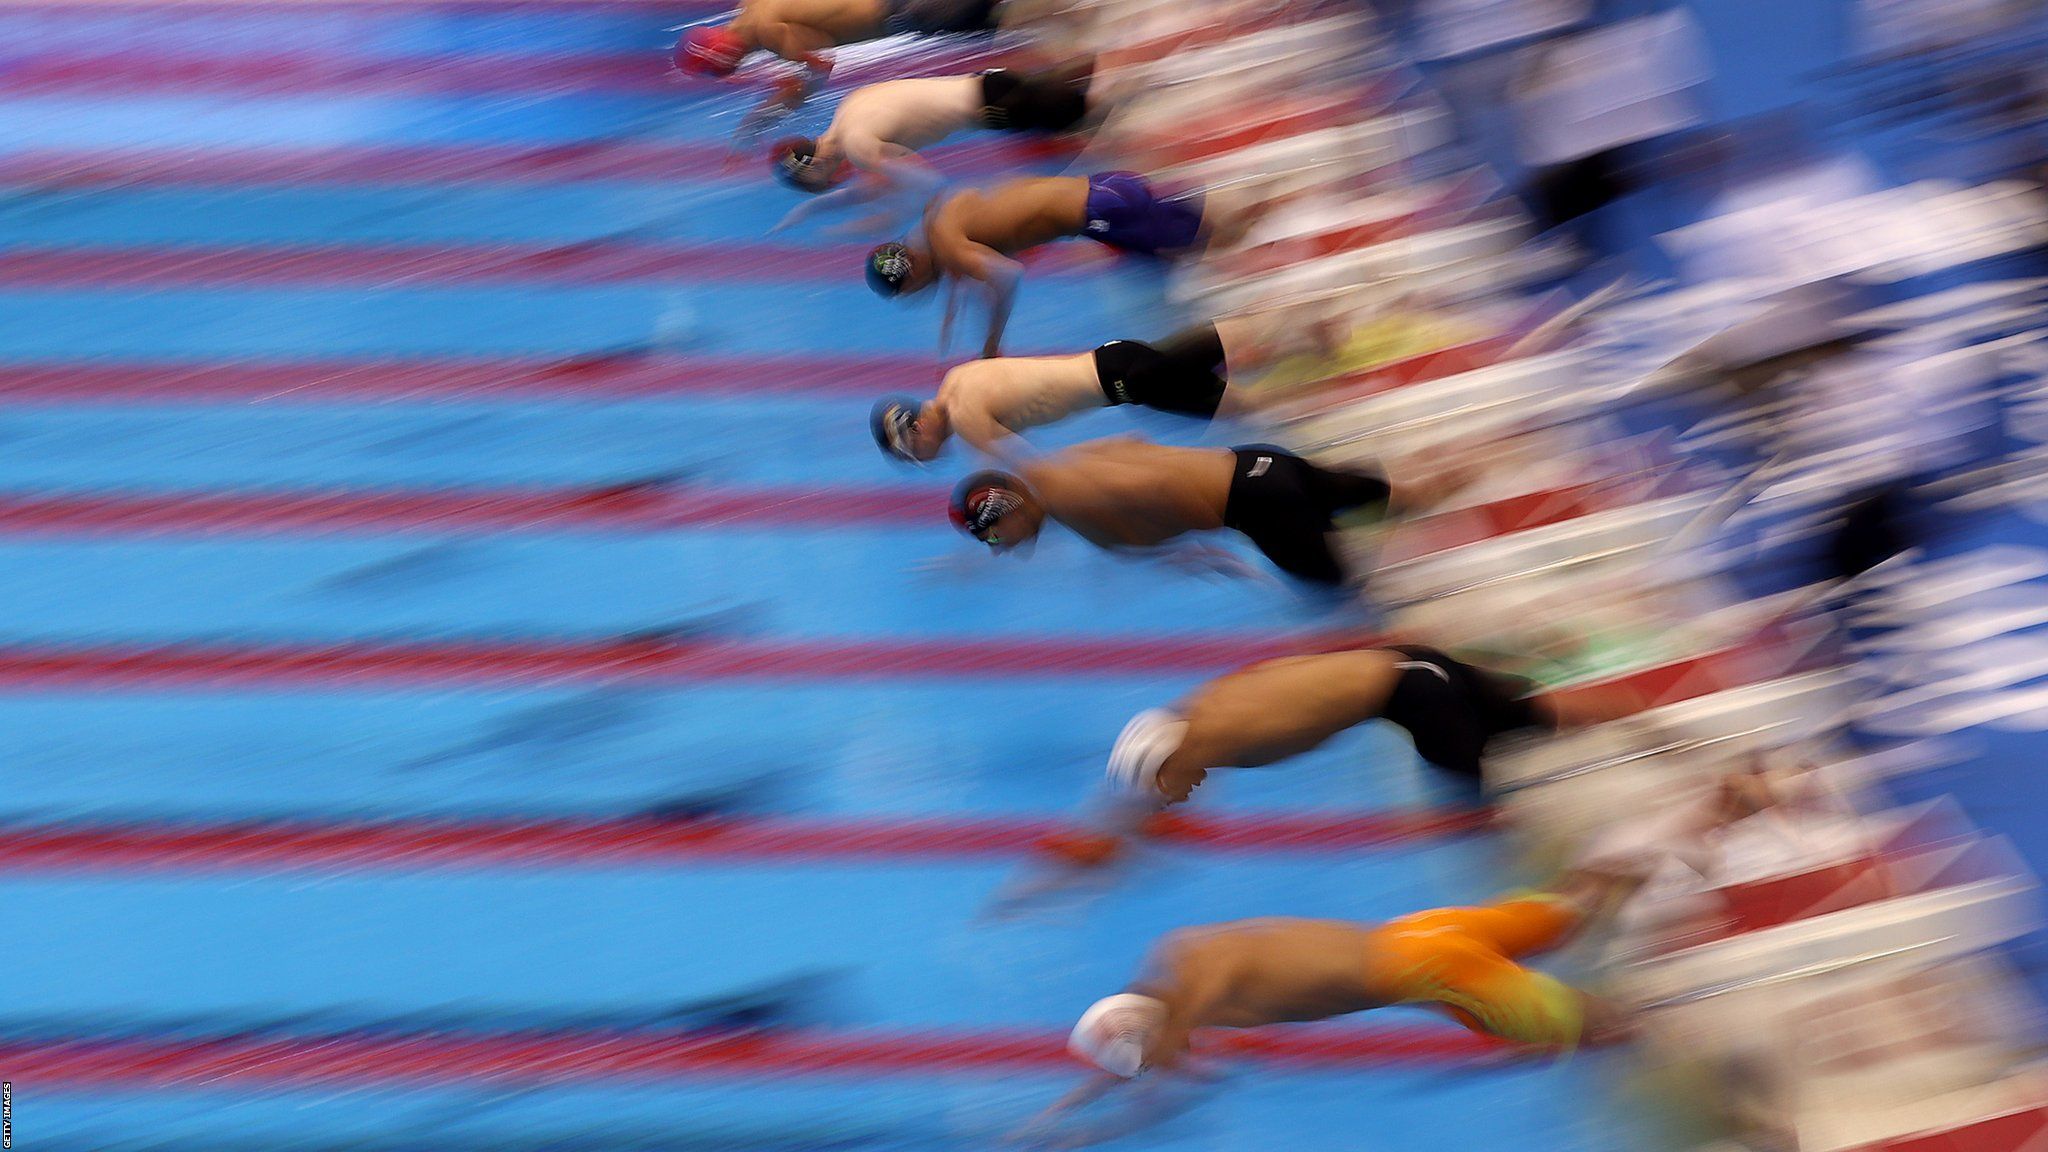 General blurred view of swimmers